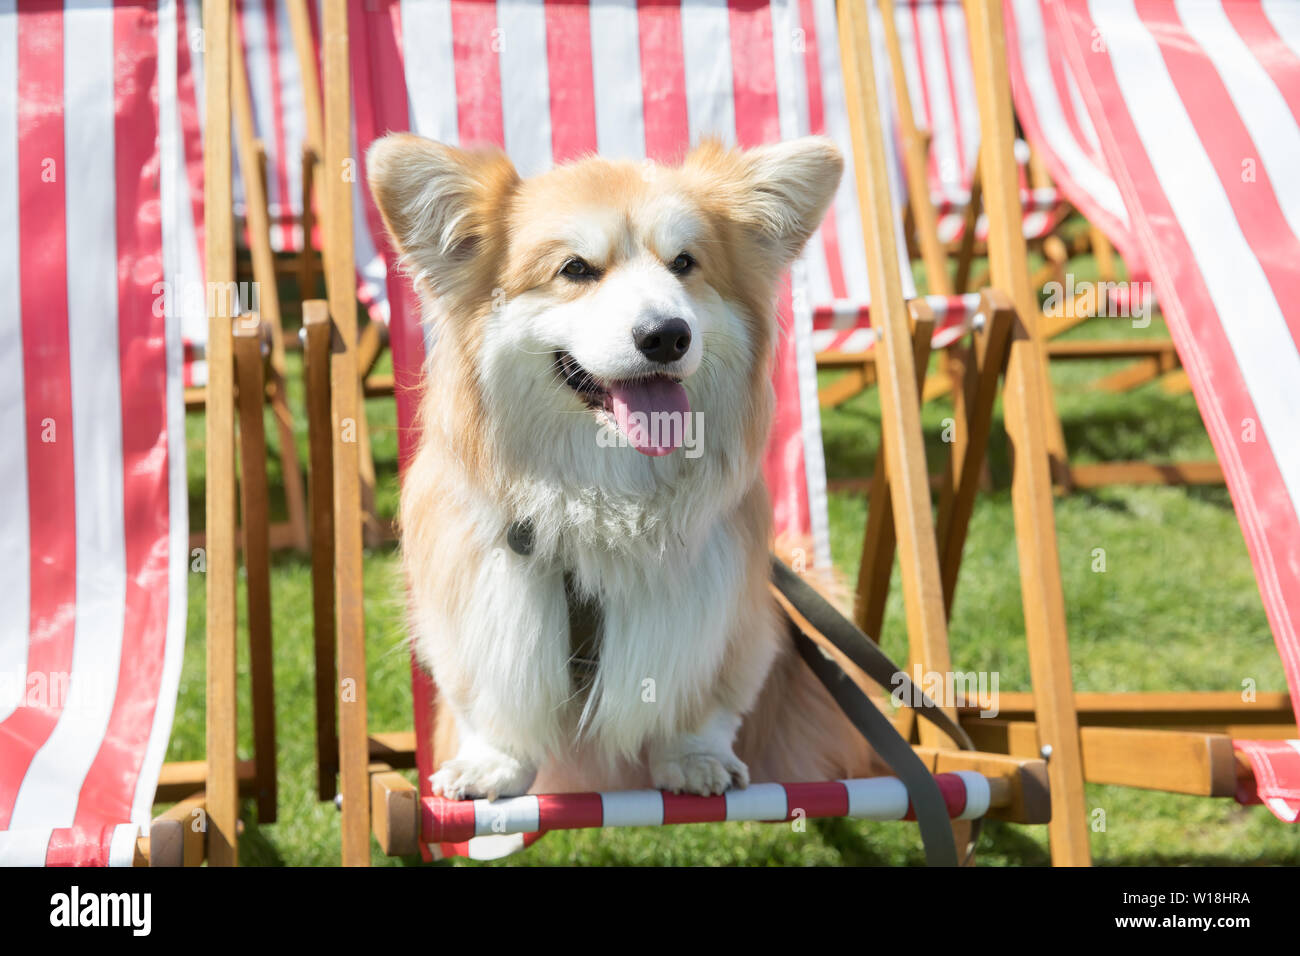 East Molesey, UK. 1st July, 2019. Marcel 'Le Corgi' who is a famous Pembroke red and white Pembroke Welsh Corgi attends RHS Hampton Court Palace Garden Festival Press Day which takes place before it officially opens tomorrow until Sunday 7th July. The world renowned flower show is a glamourous, fun and an educational day out which is attended by many celebrities. There are many gardens, floral displays, Marquees all set in the glorious grounds of Hampton Court Palace. Credit: Keith Larby/Alamy Live News Stock Photo